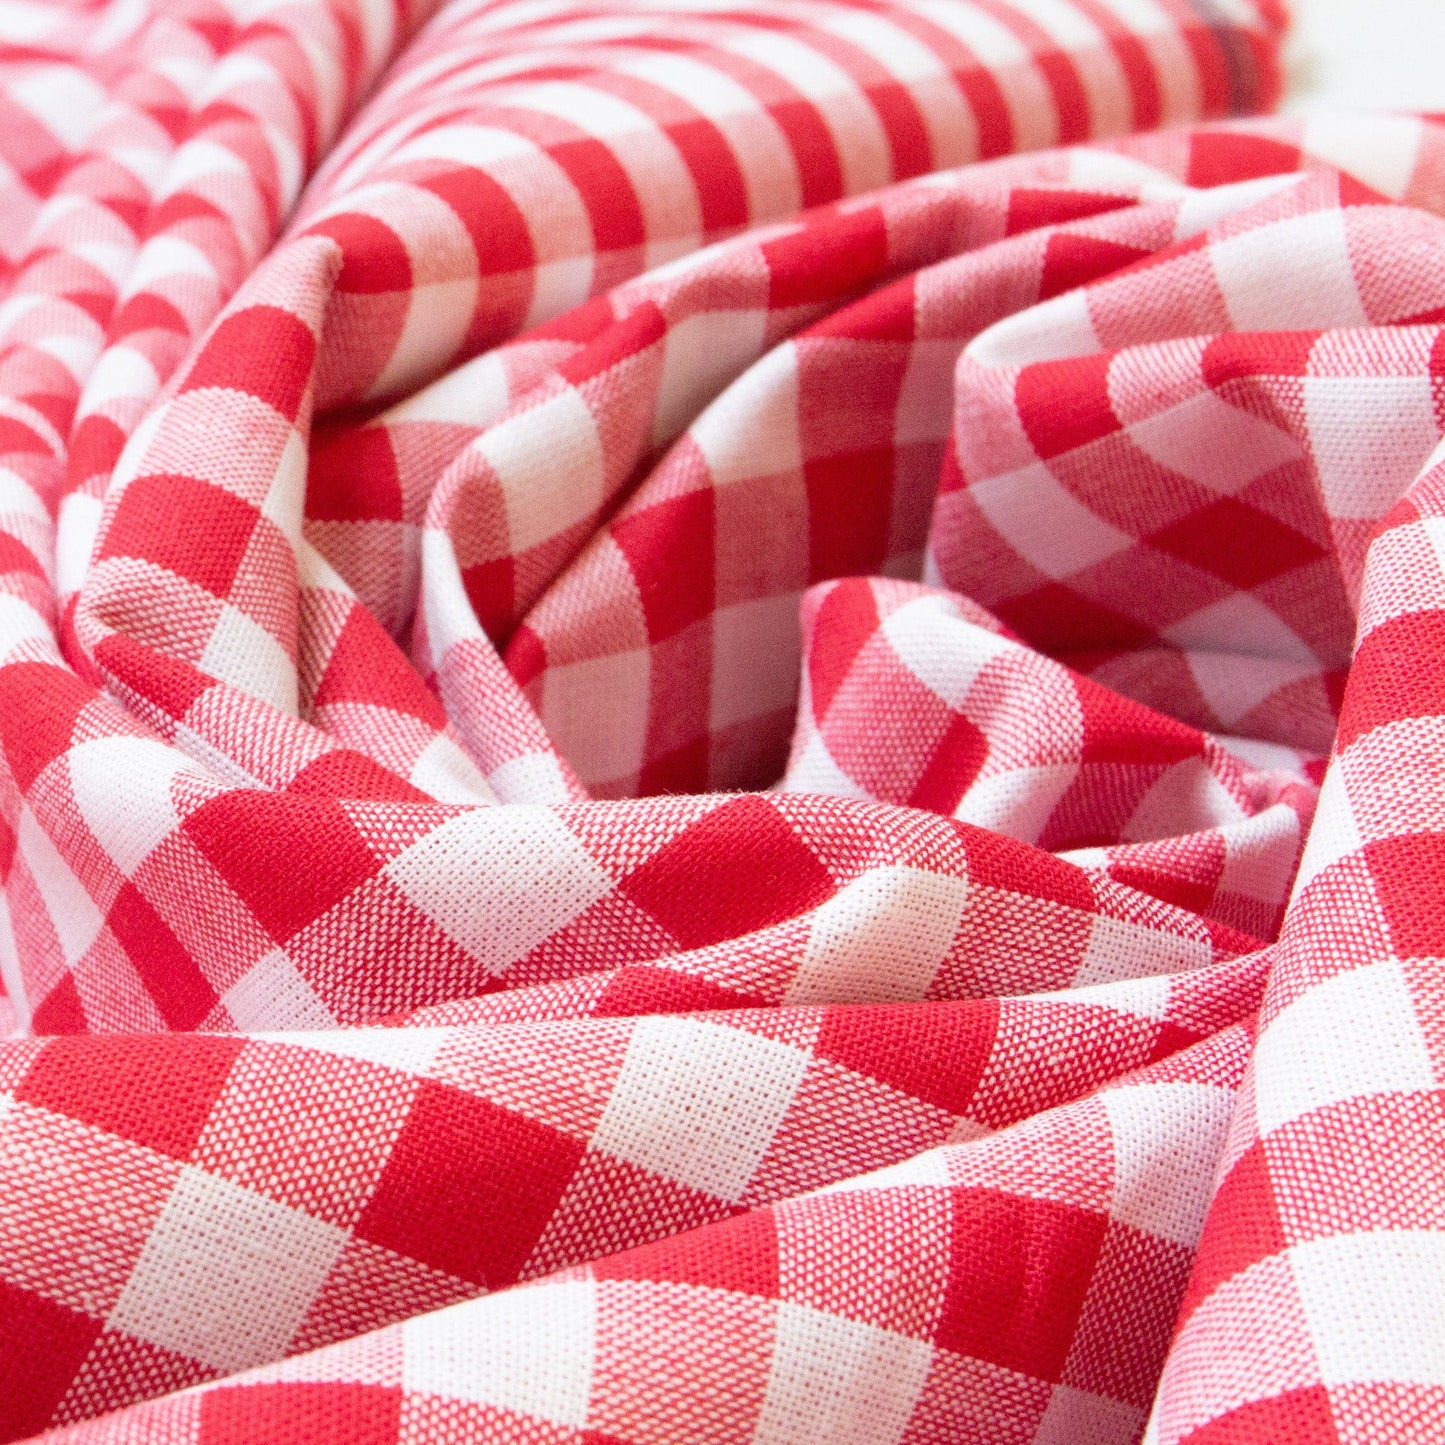 Cotton Gingham in Red and White 1 cm Check